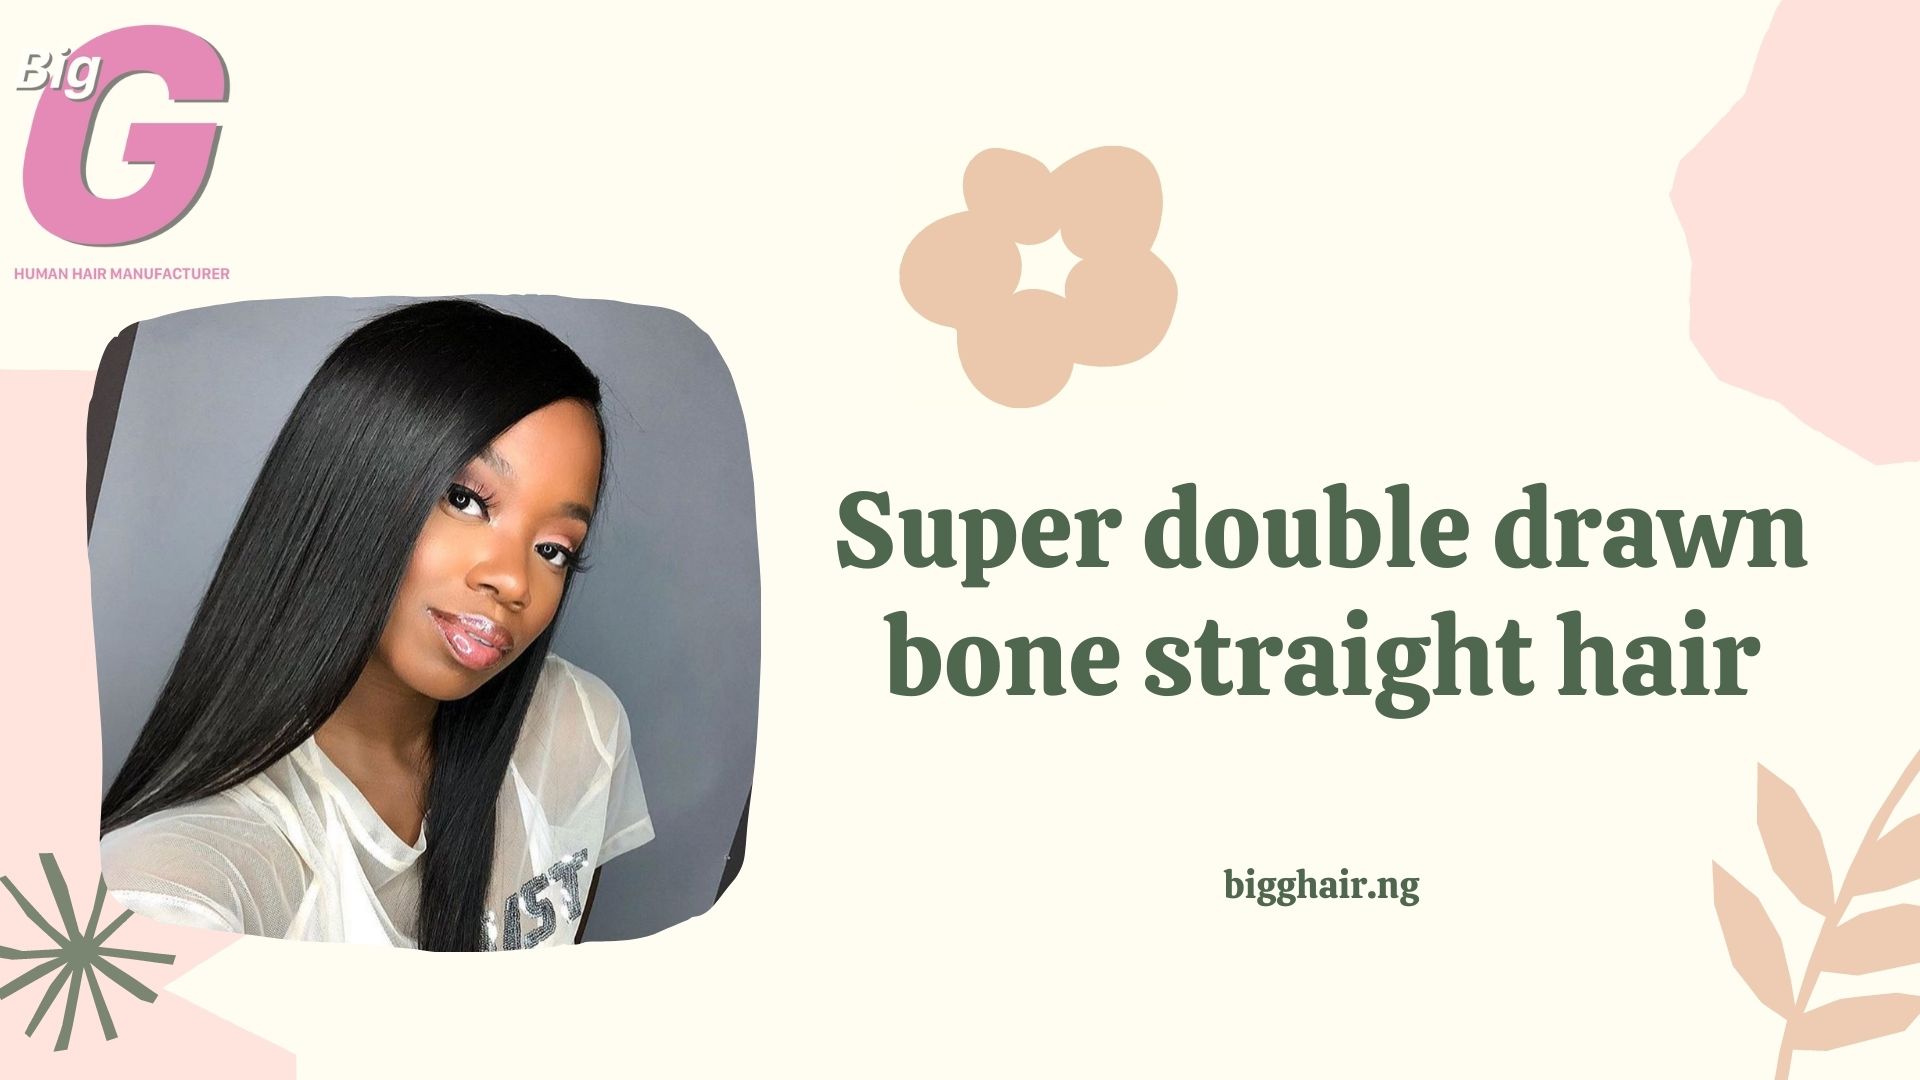 An untold story of super double drawn bone straight hair